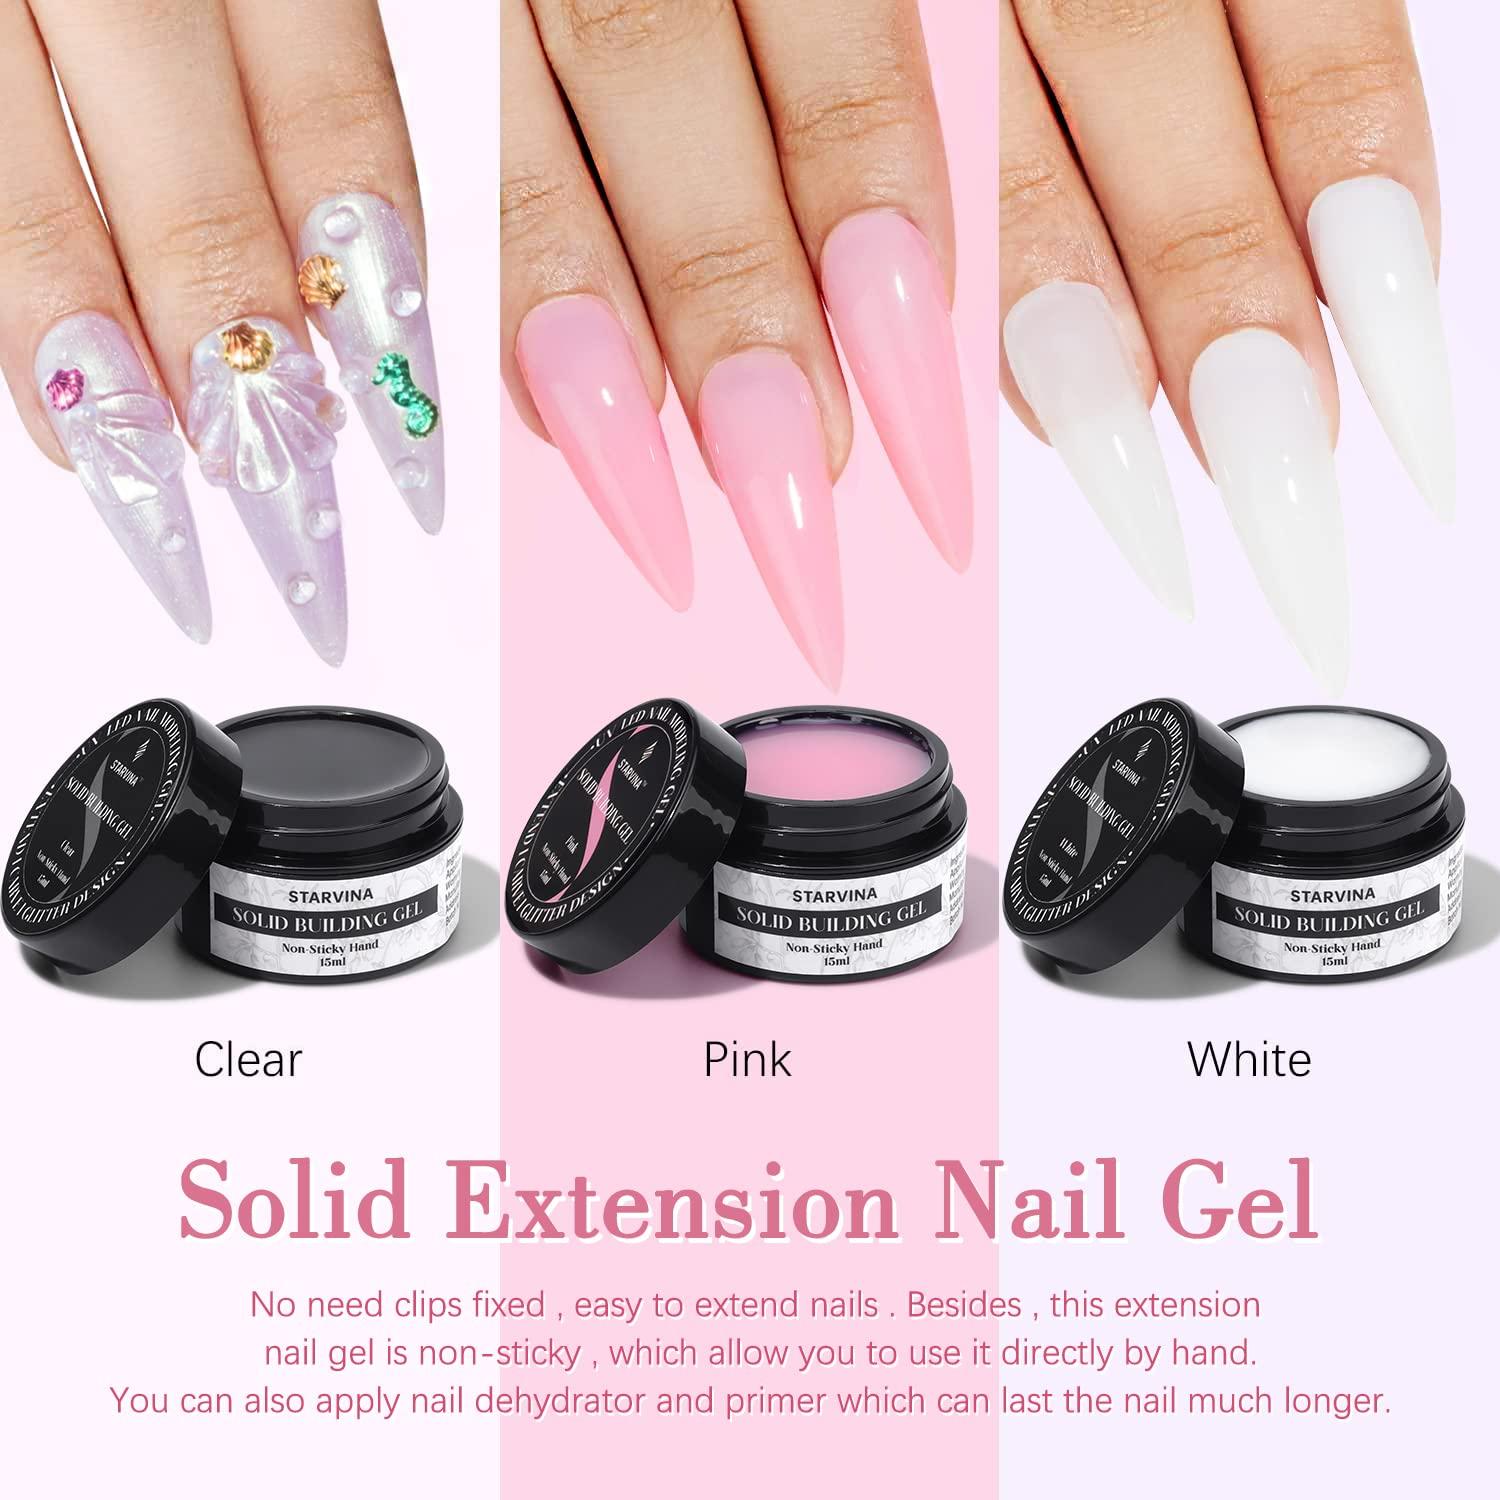 Non Stick Nail Extension Gel, Acrylic Hand Extension Gel